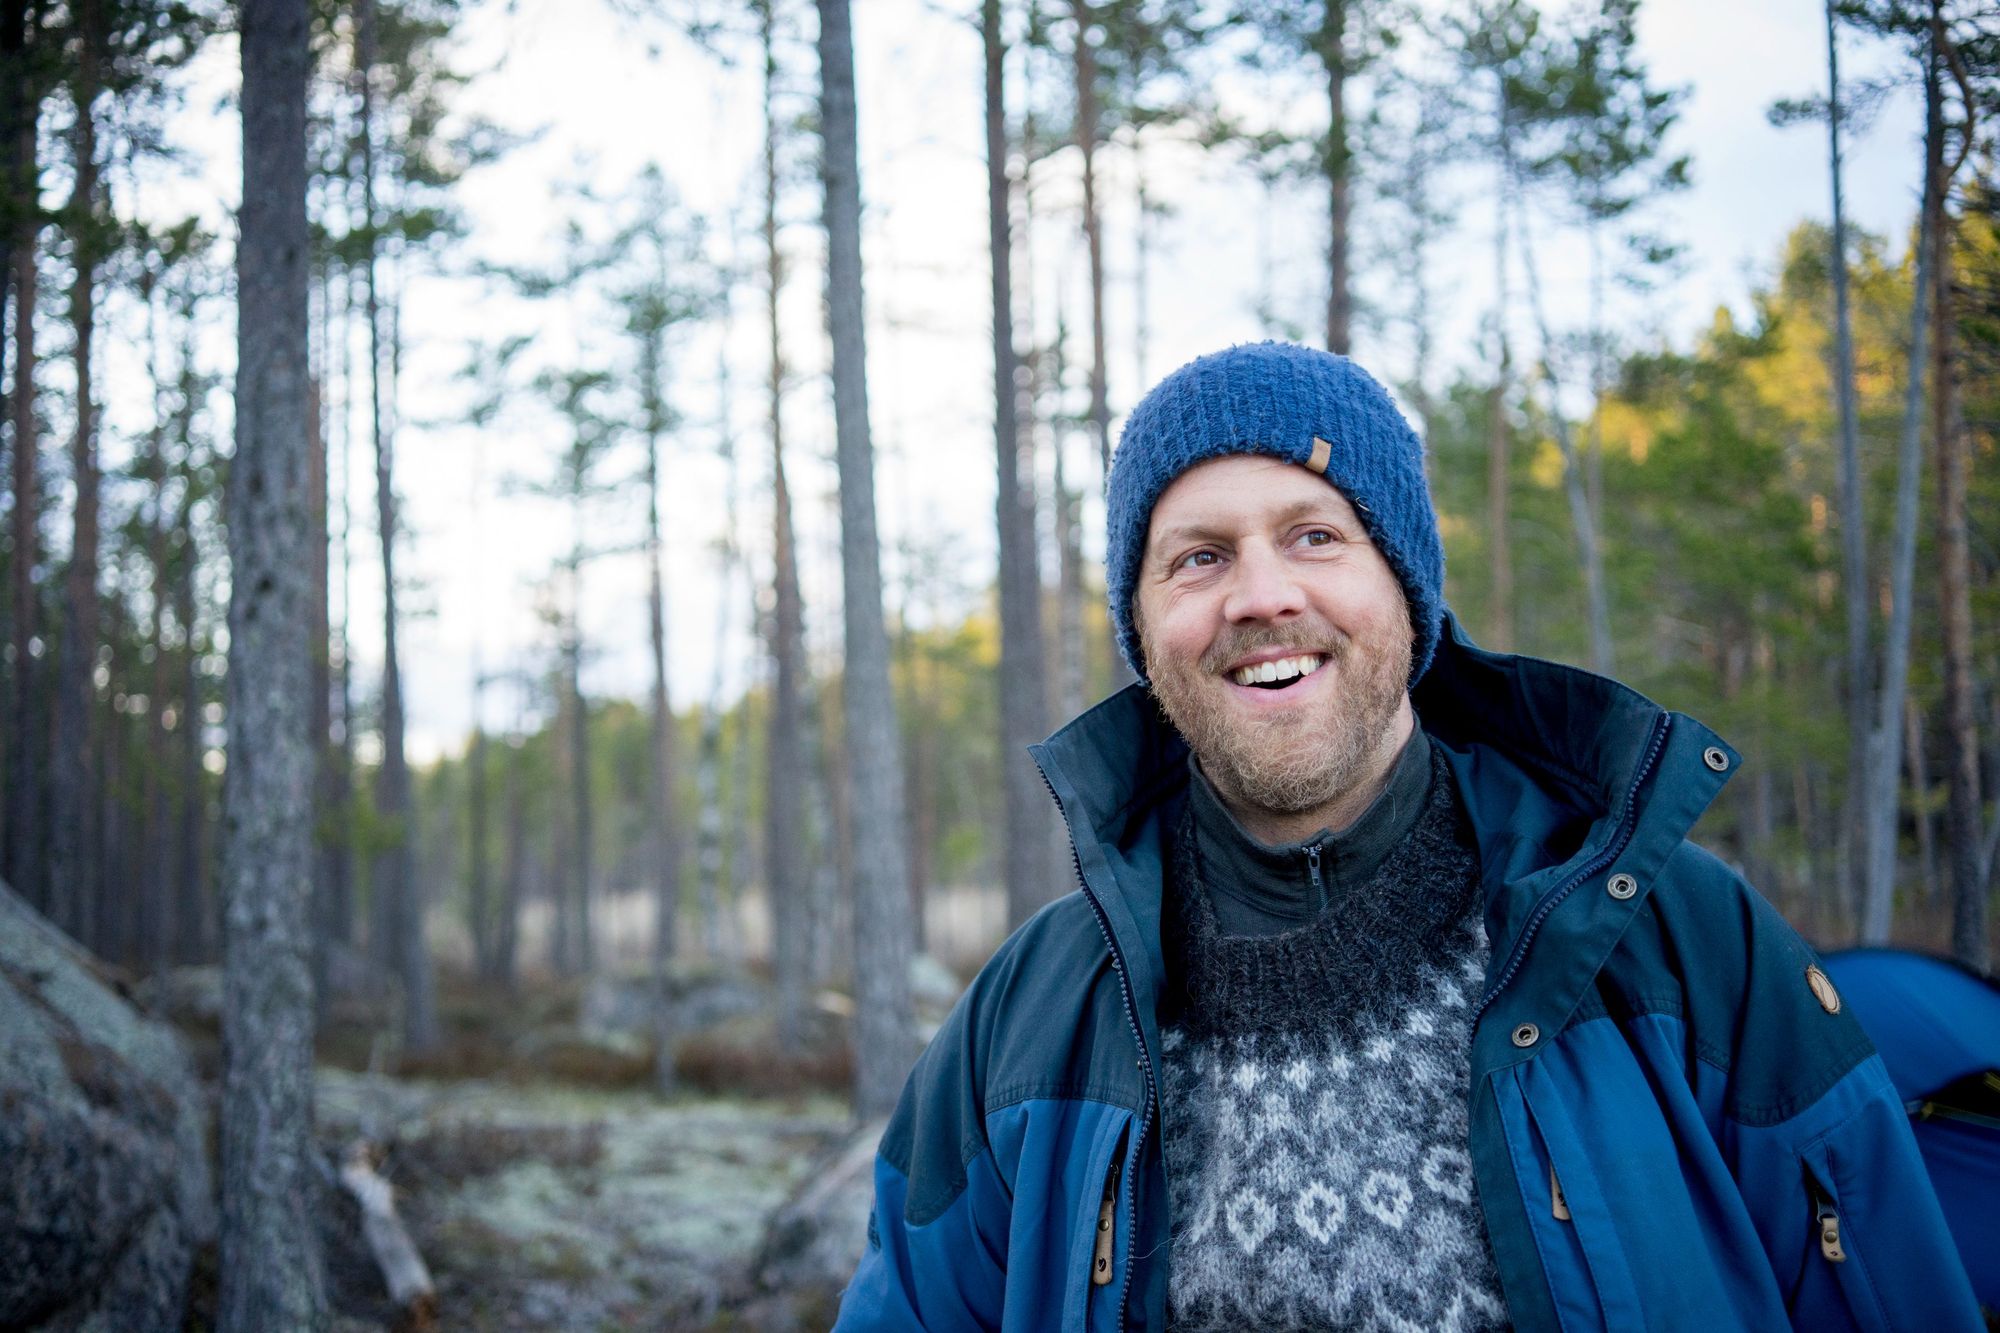 Almost 70% of Sweden is made up of forest, and Marcus has been guiding in that landscape for over 20 years. Photo: Jakob Wallin